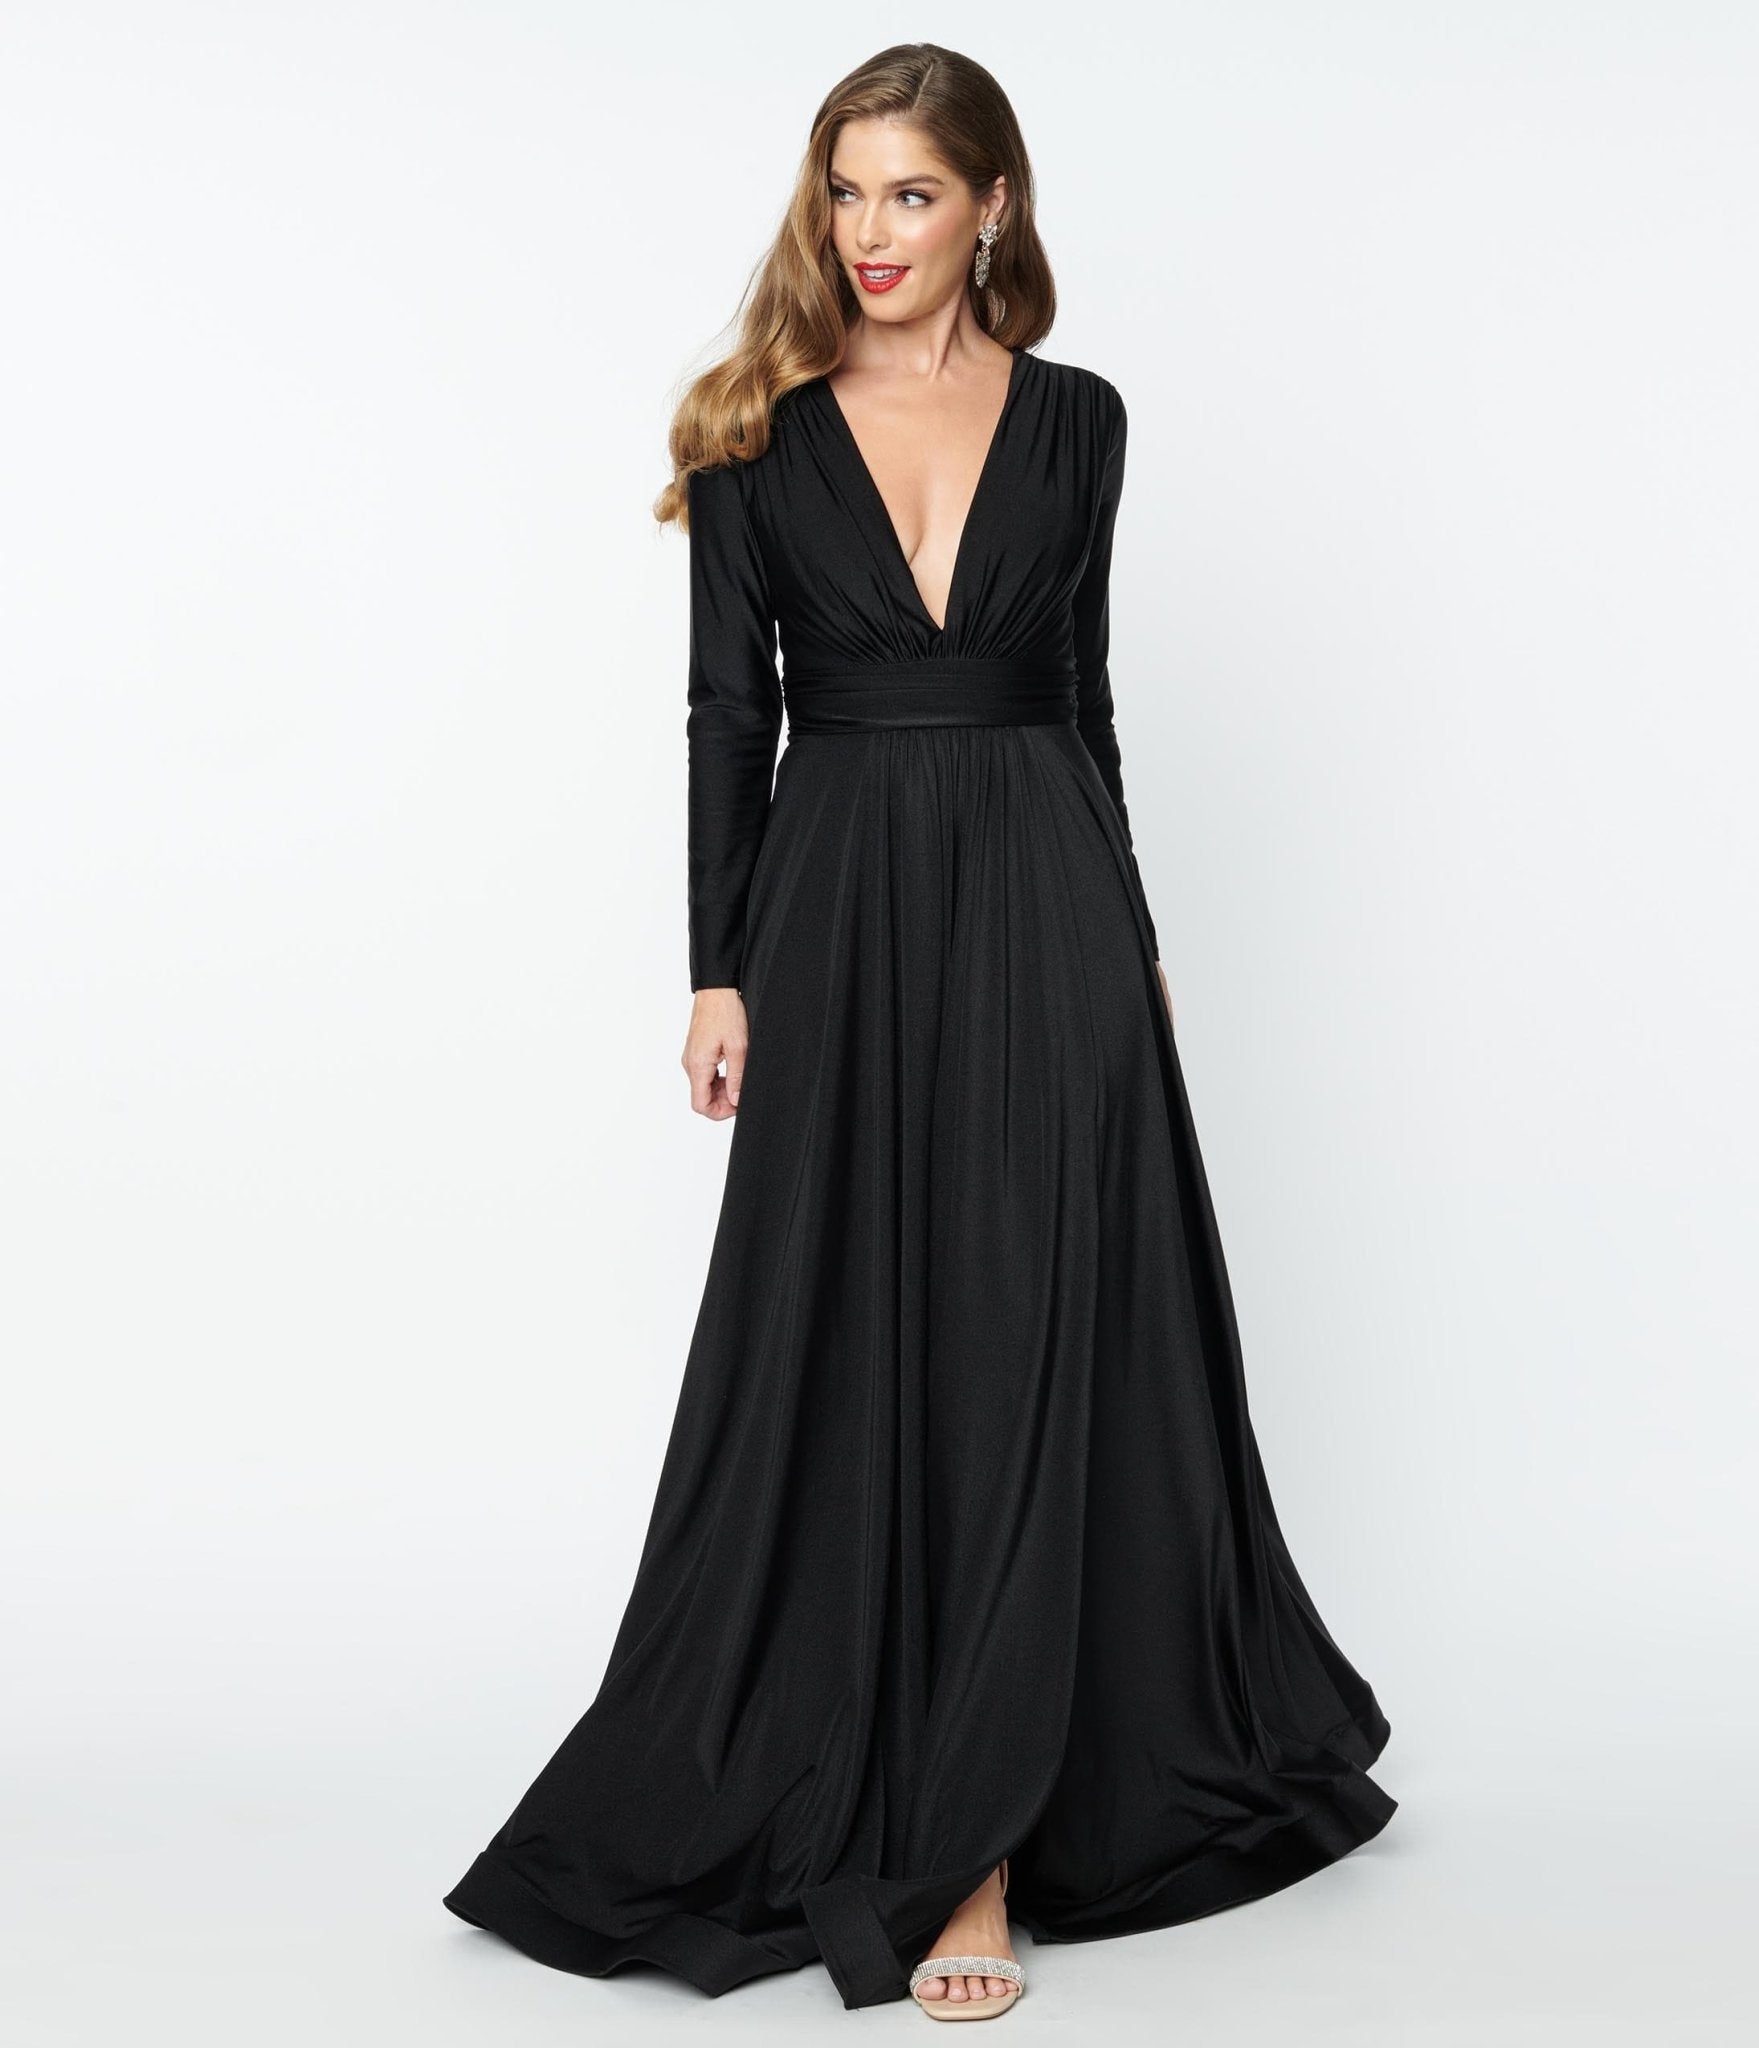 A causal party dress for a woman with unique design | Ball gowns, Evening  dresses, Prom dresses